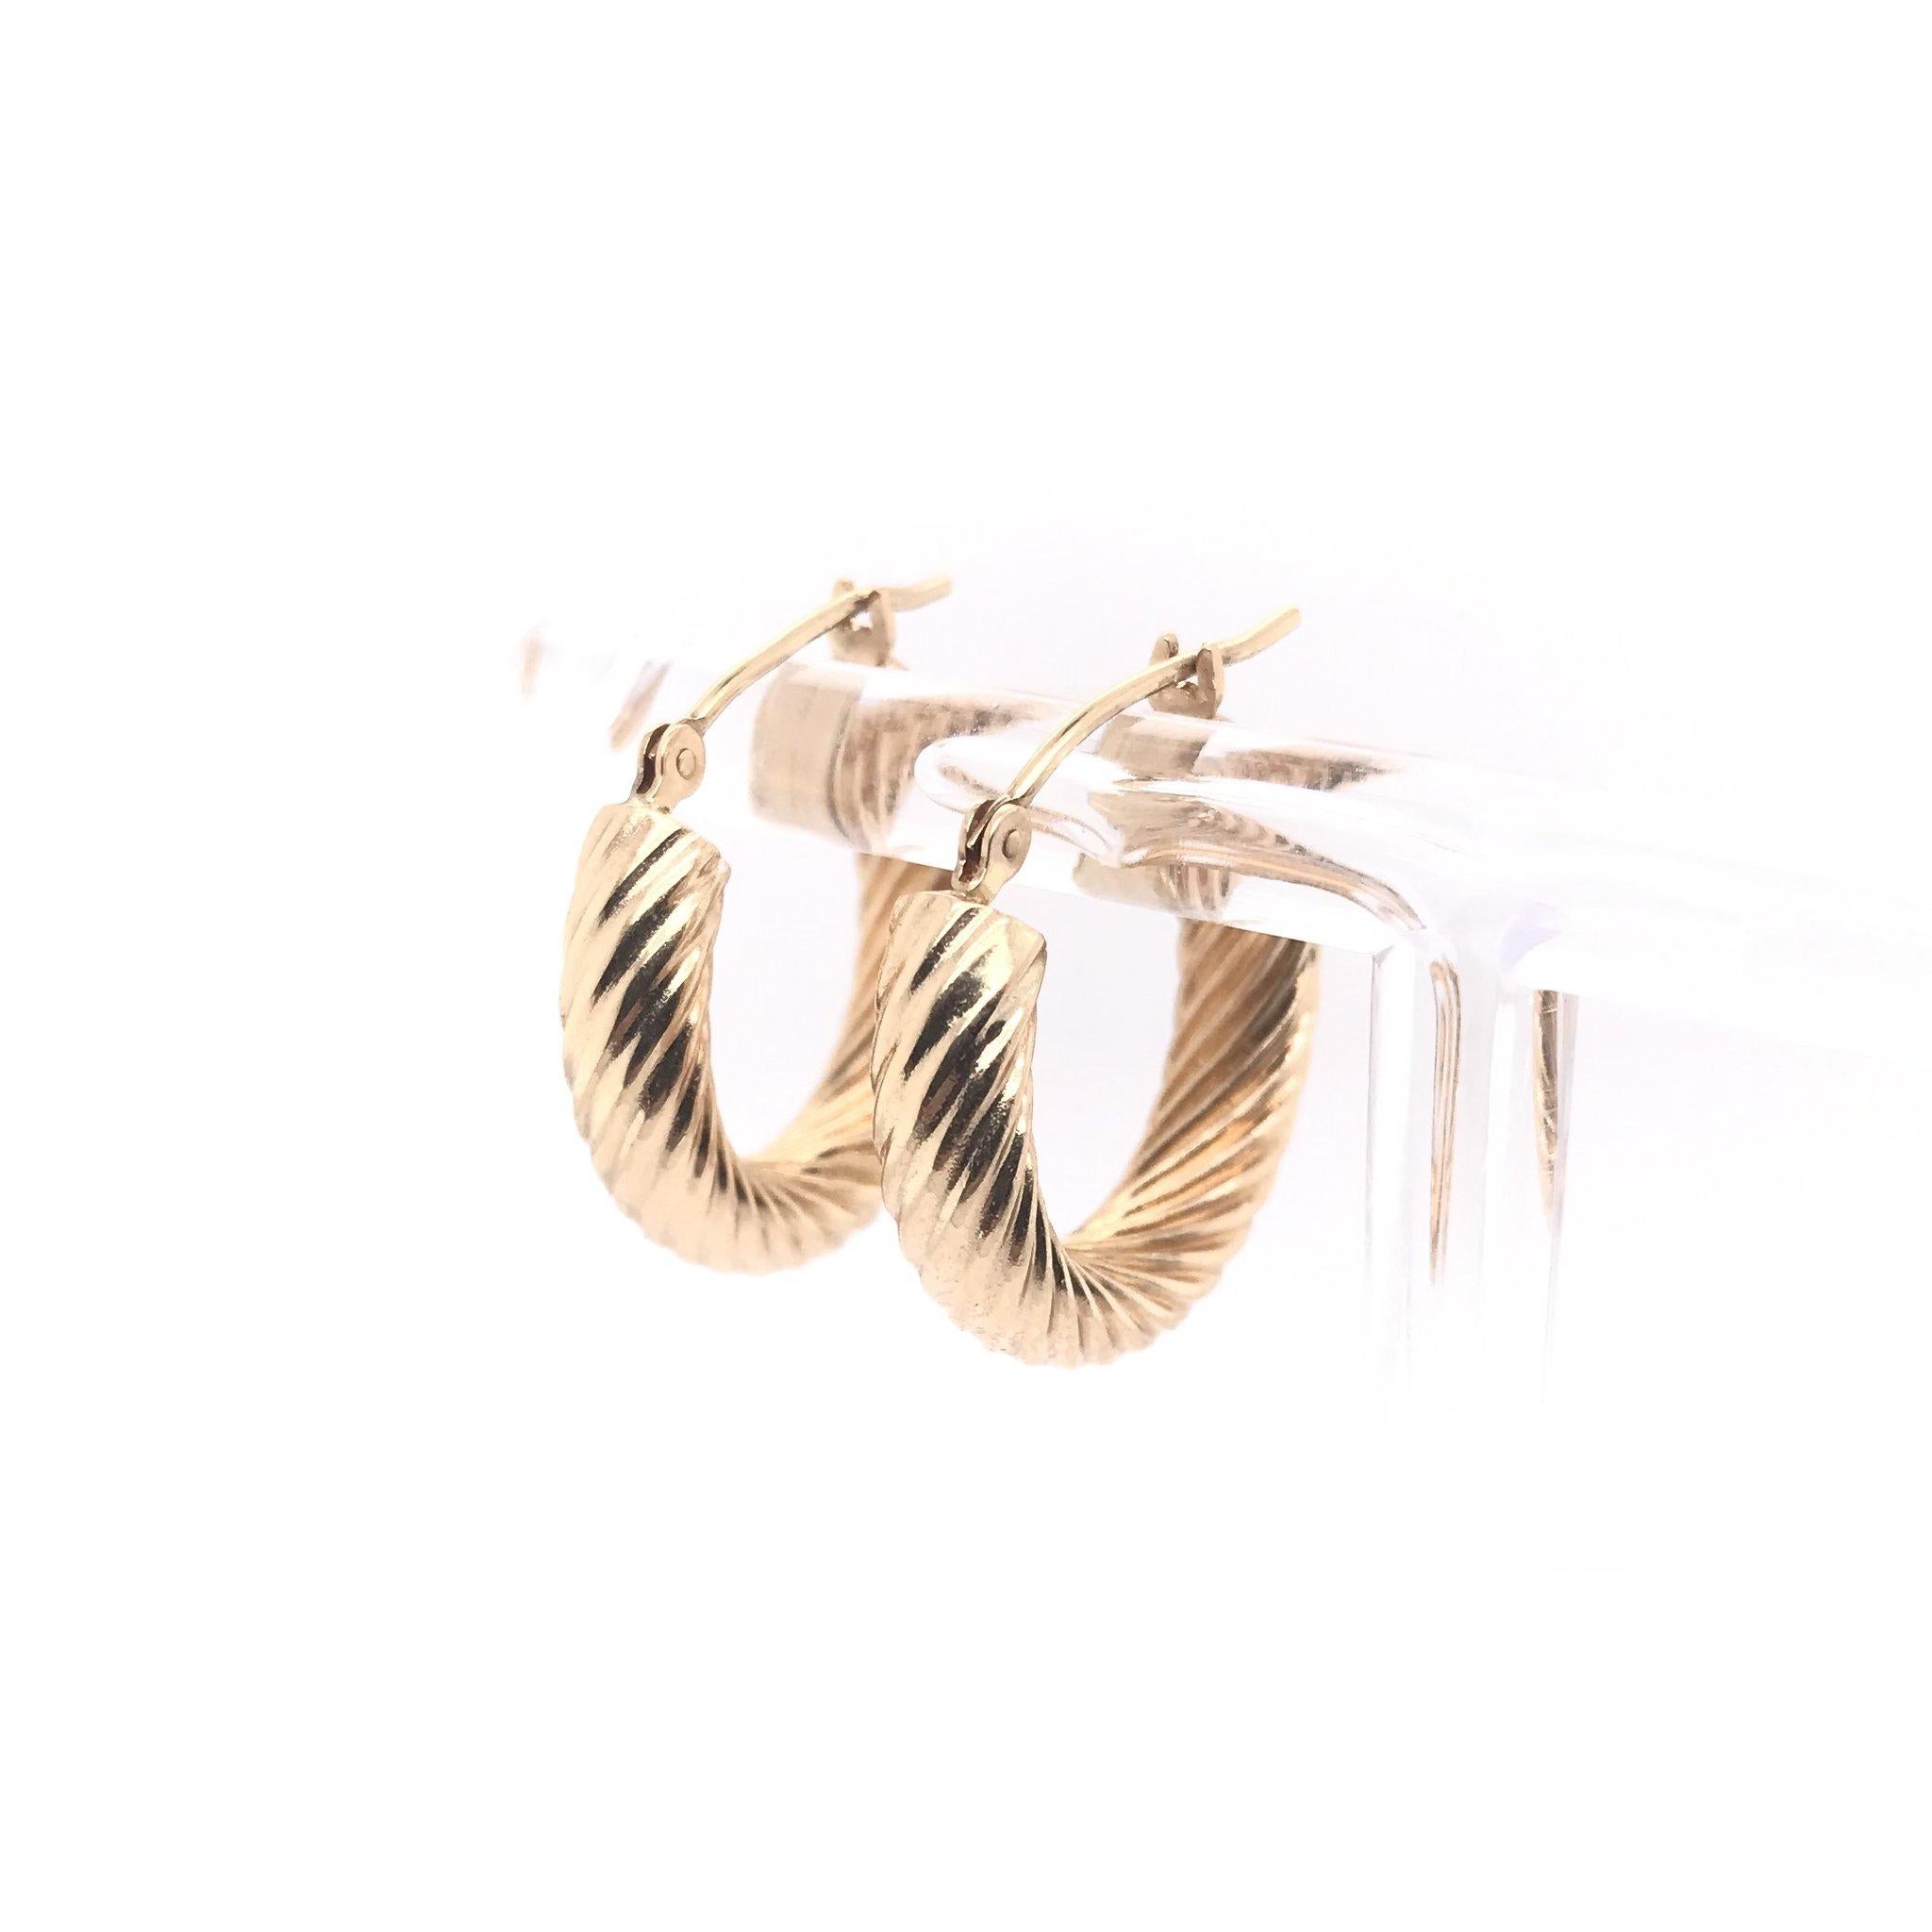 These hoop earrings are a contemporary piece and have never been worn. These 14k gold hoop earrings measure approximately 3/4s of an inch in length and feature a stylish twist motif. The earrings are sturdy but hollow allowing for a very comfortable